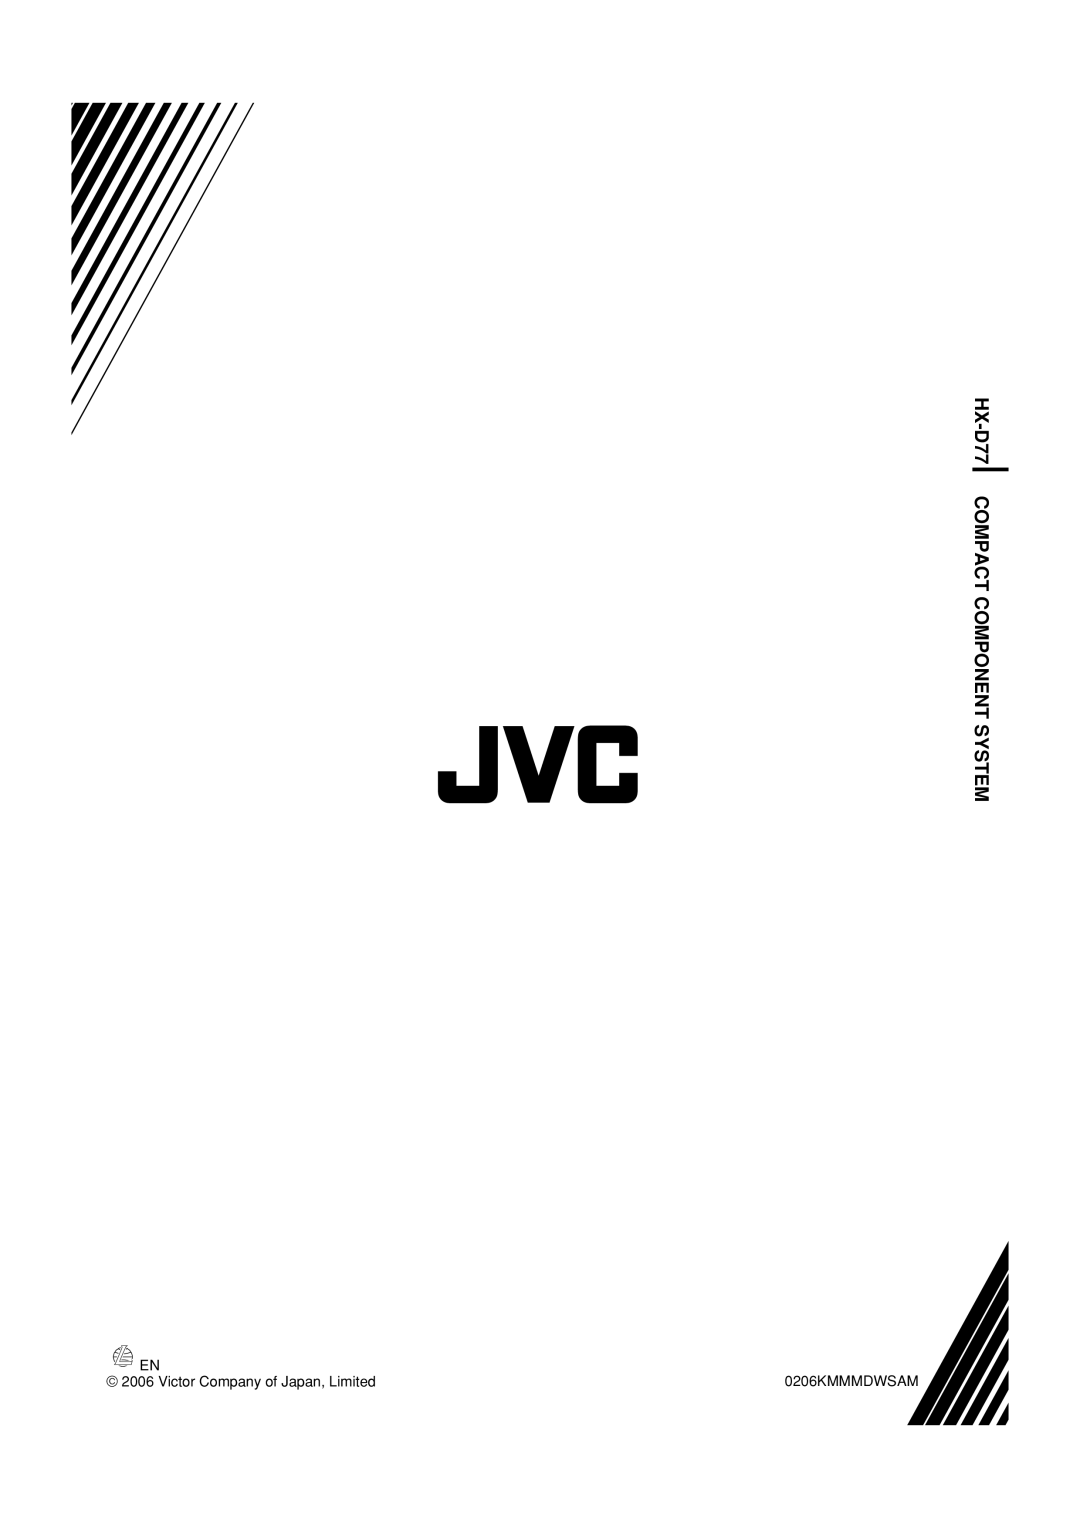 JVC manual HX-D77COMPACT COMPONENT SYSTEM, 0206KMMMDWSAM, Victor Company of Japan, Limited 